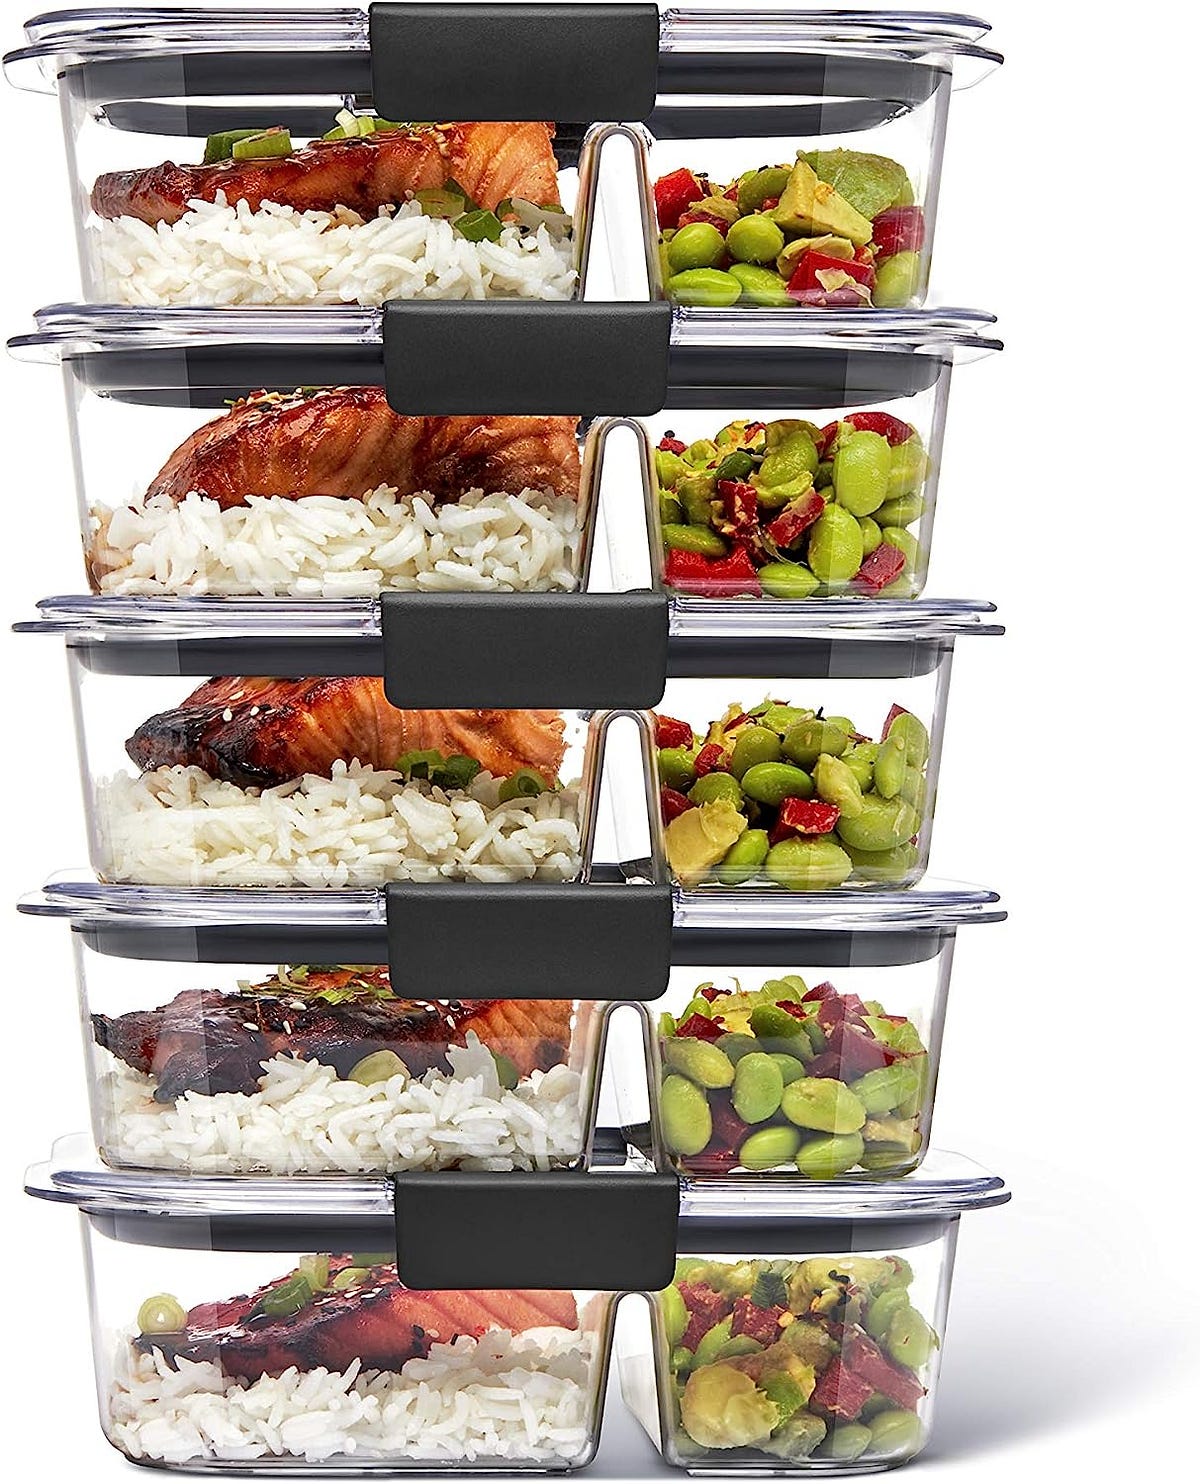 5 Tips for Choosing Reusable Food Containers - Meal Planning Magic